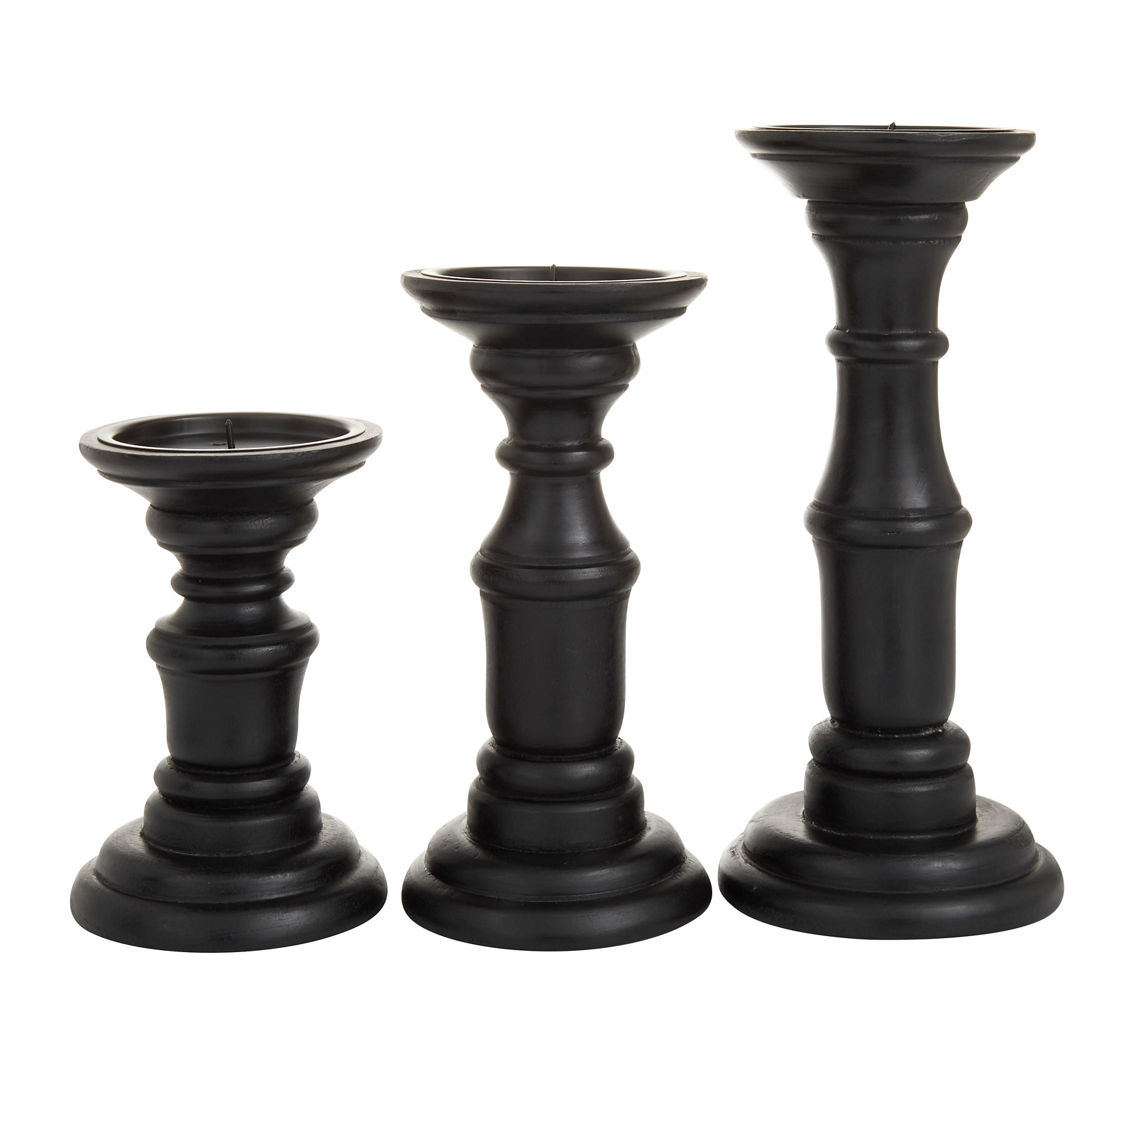 Morgan Hill Home Traditional Black Mango Wood Candle Holder Set - Image 3 of 5